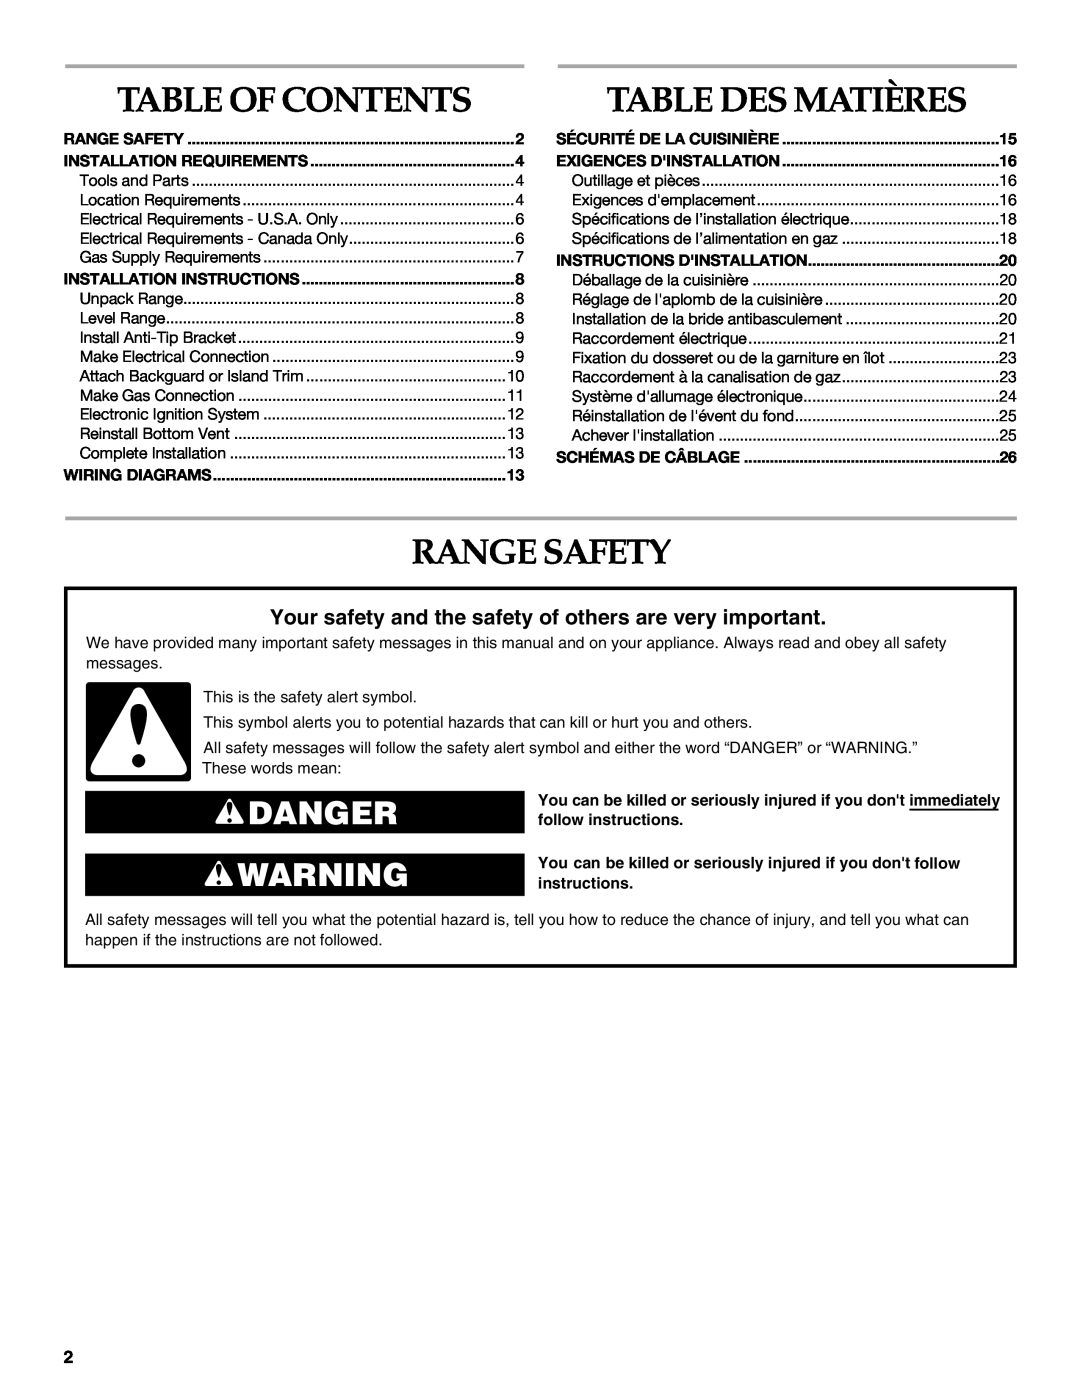 KitchenAid 9759121A Table Des Matières, Range Safety, Danger, Table Of Contents, Installation Requirements 